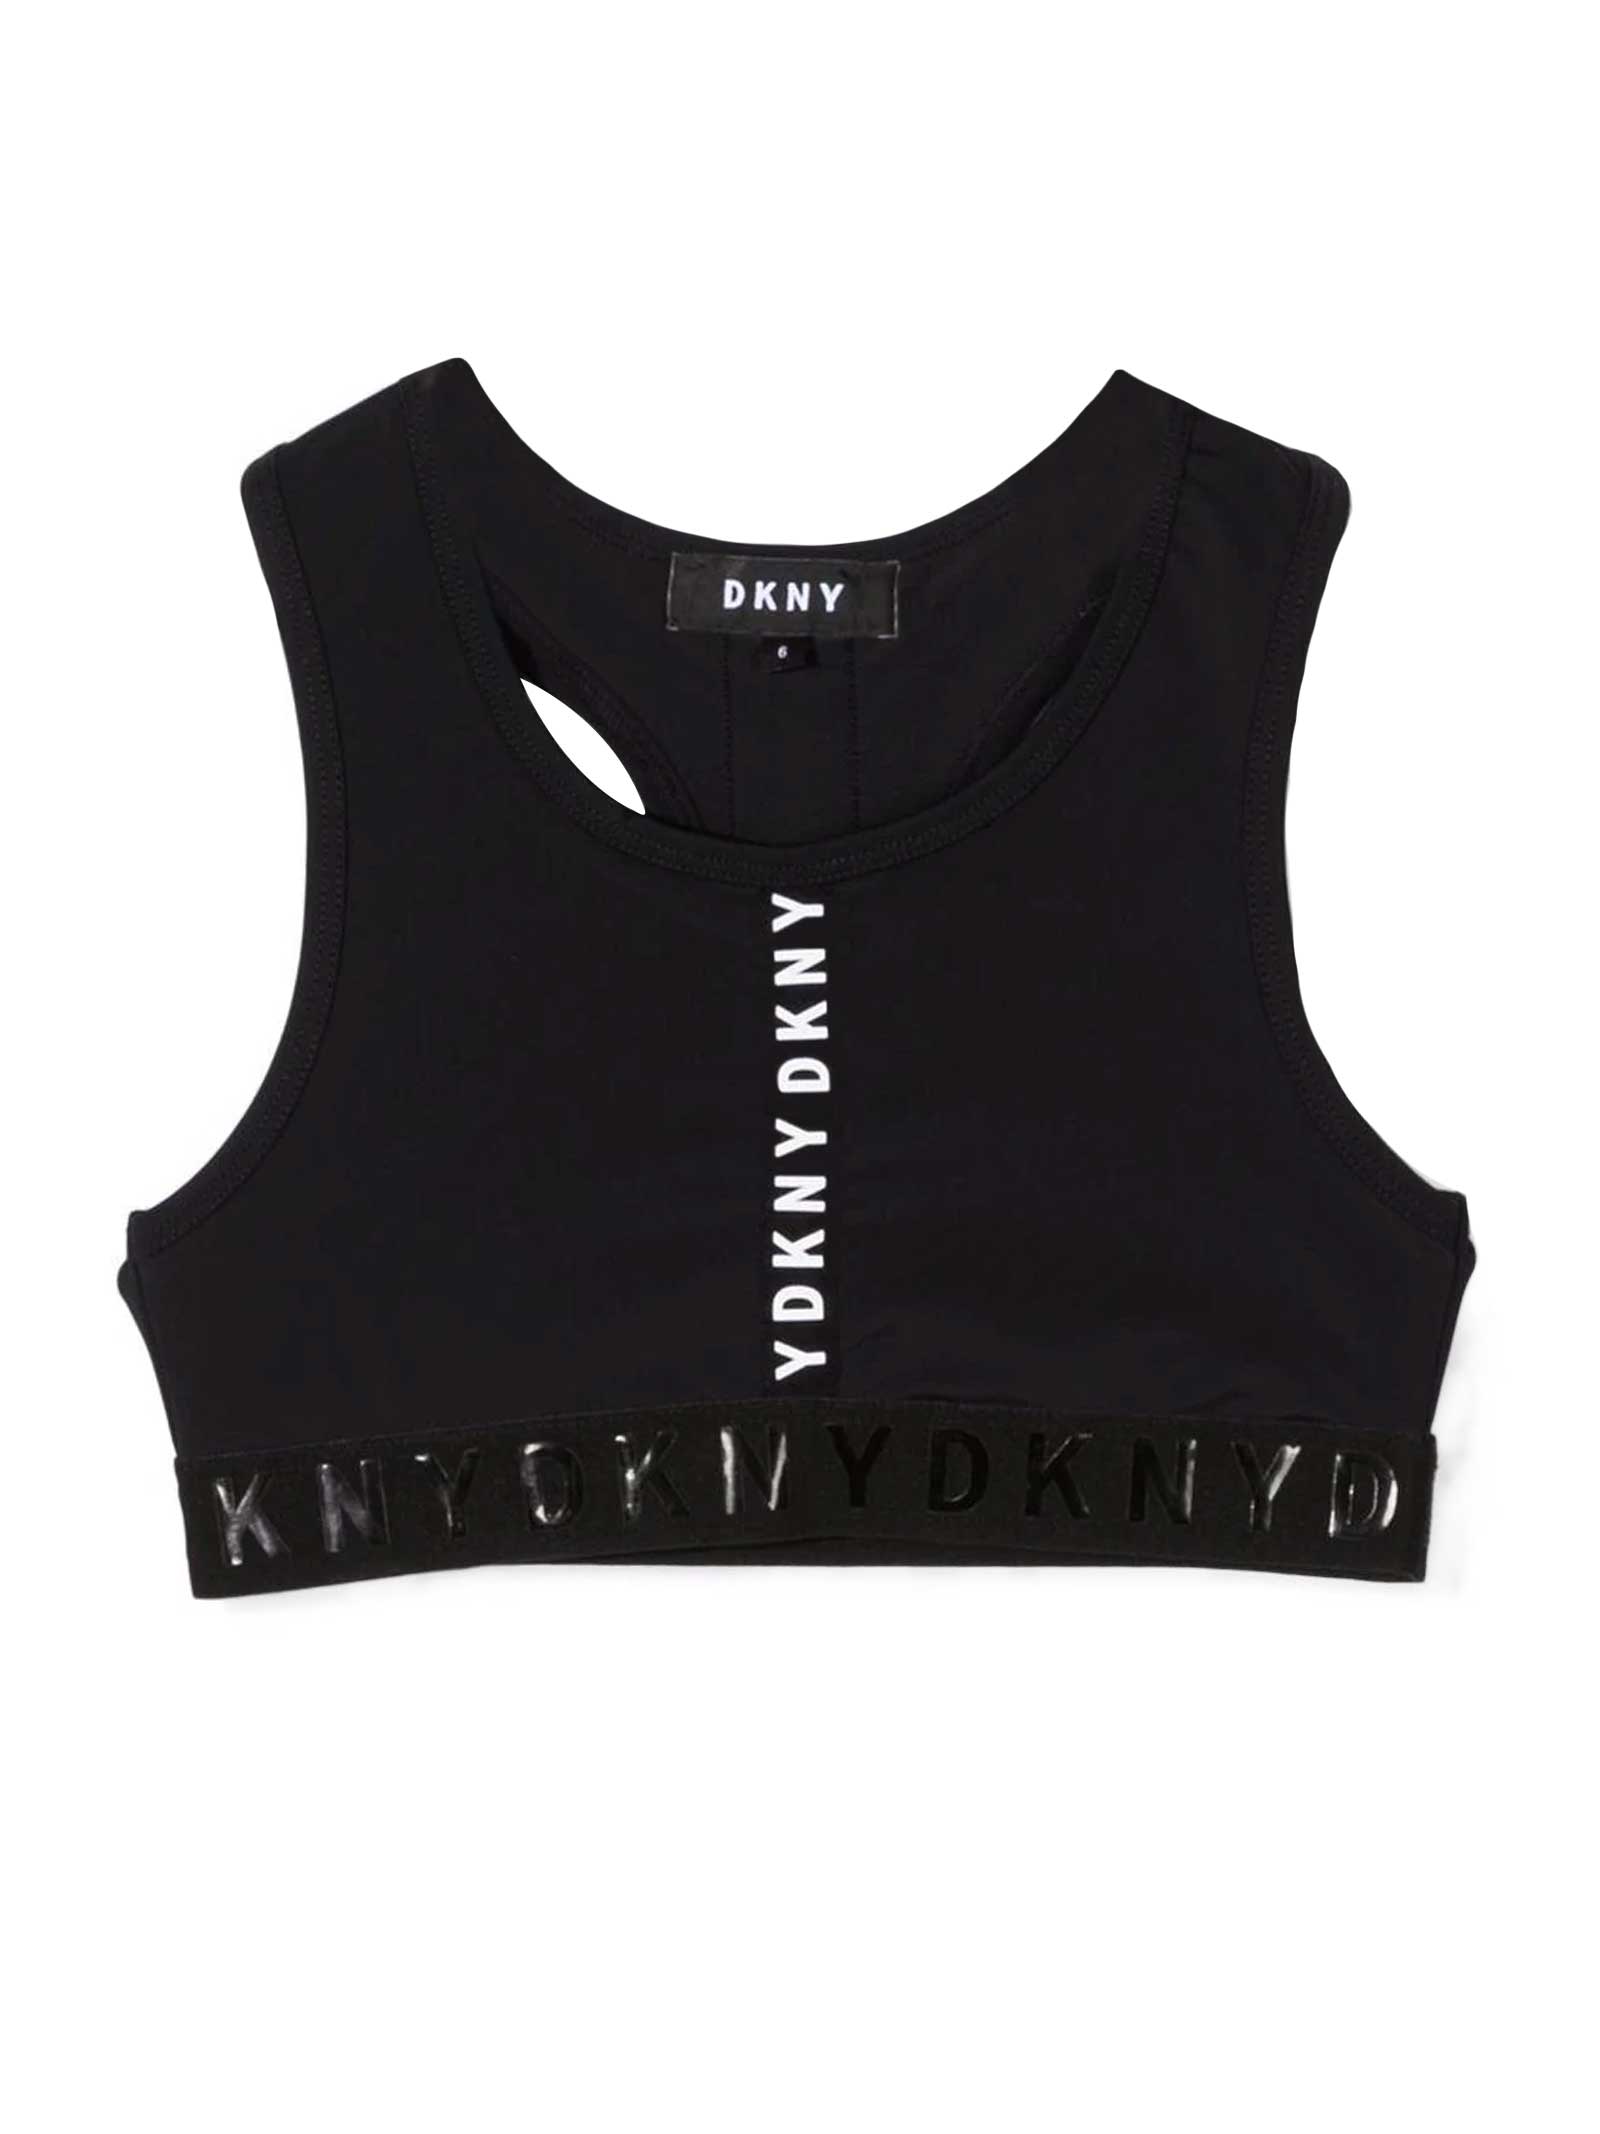 DKNY Black Top With Print